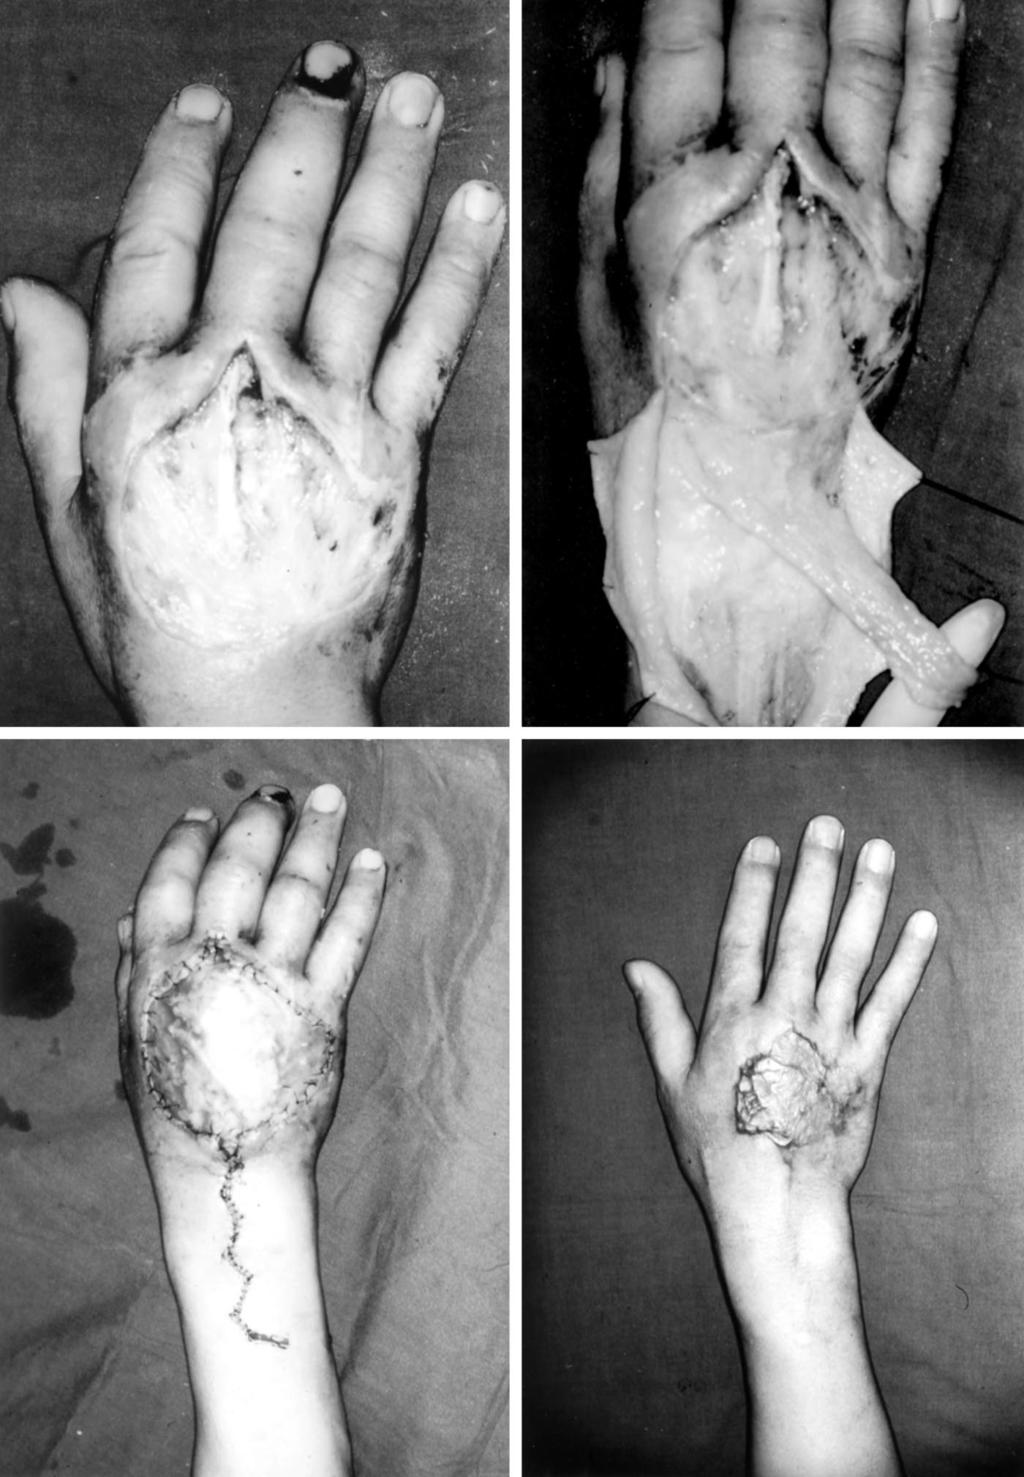 Vol. 114, No. 2 / DORSAL FOREARM FASCIOSUBCUTANEOUS FLAP 393 FIG. 4. Case 1. A 38-year old man with a crush injury on the dorsum of his right hand. (Above, left) Preoperative view.